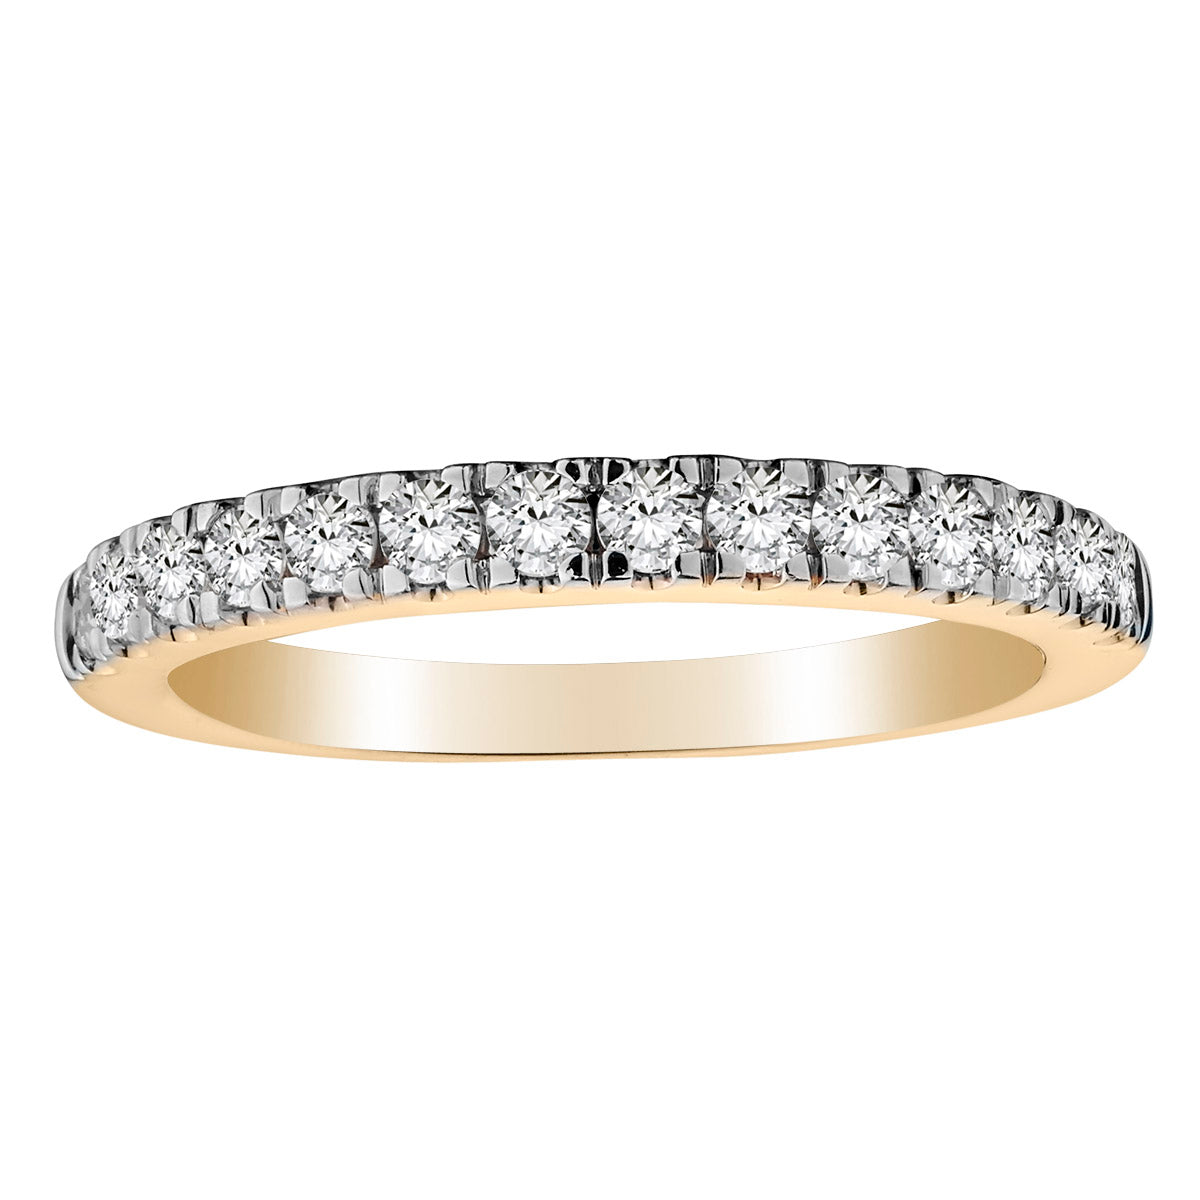 .50 Carat of Diamonds Luxury Band Ring, 14kt Yellow Gold......................NOW